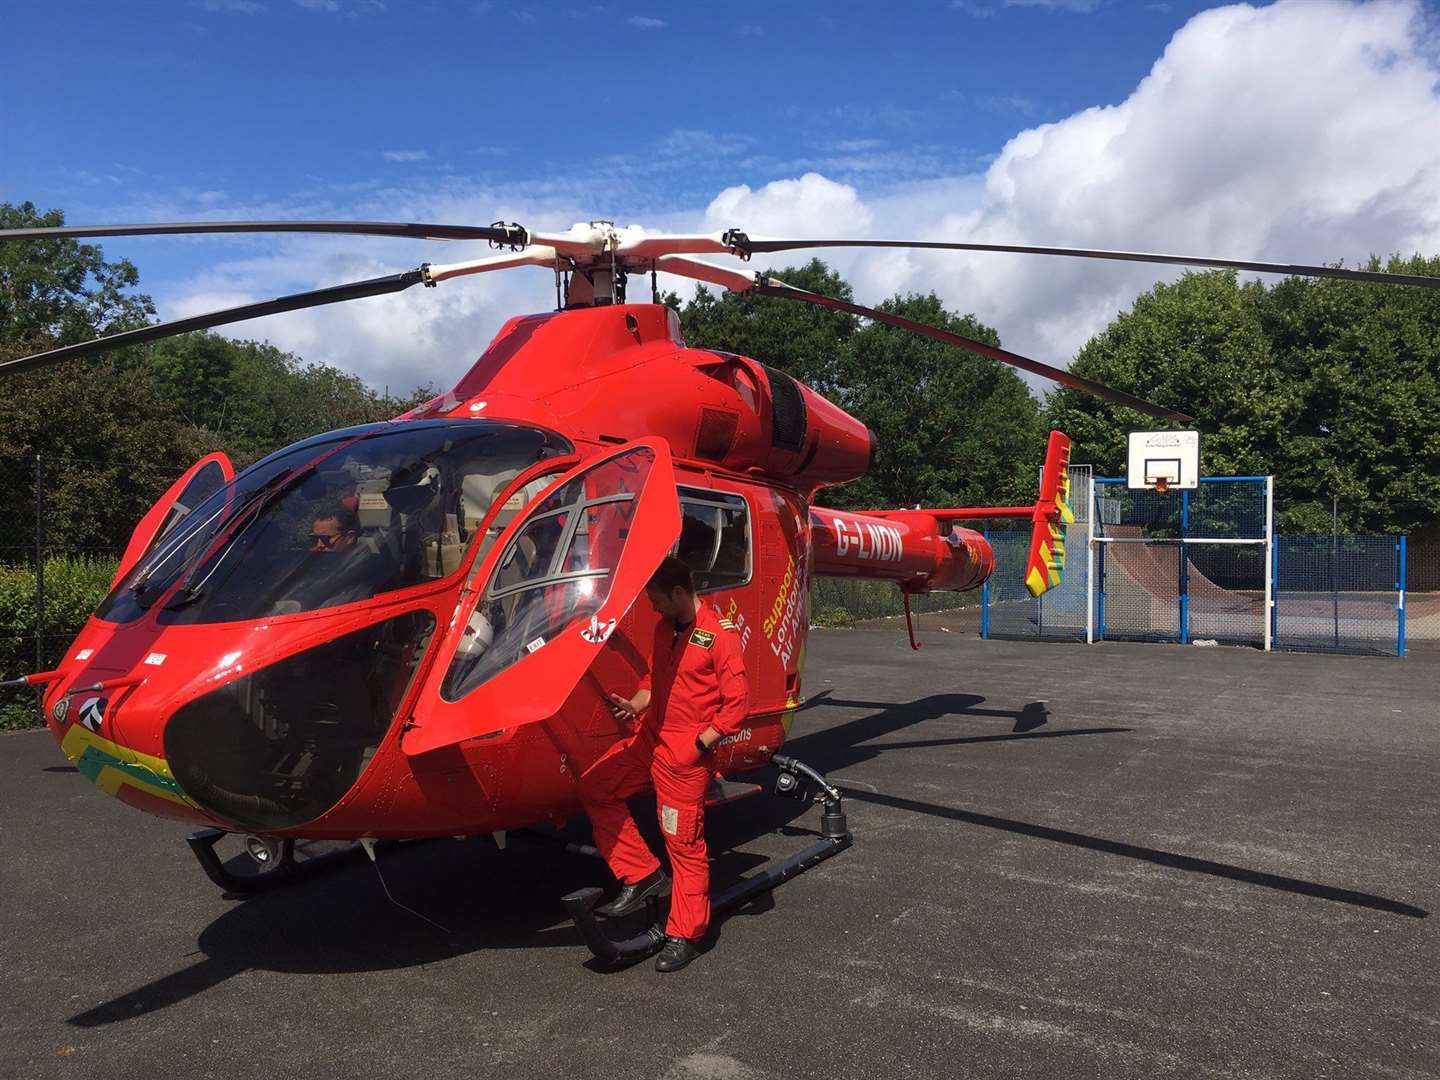 The London Air Ambulance was pictured in the basketball court in Bromley Library Gardens. Picture: Barry Driscoll